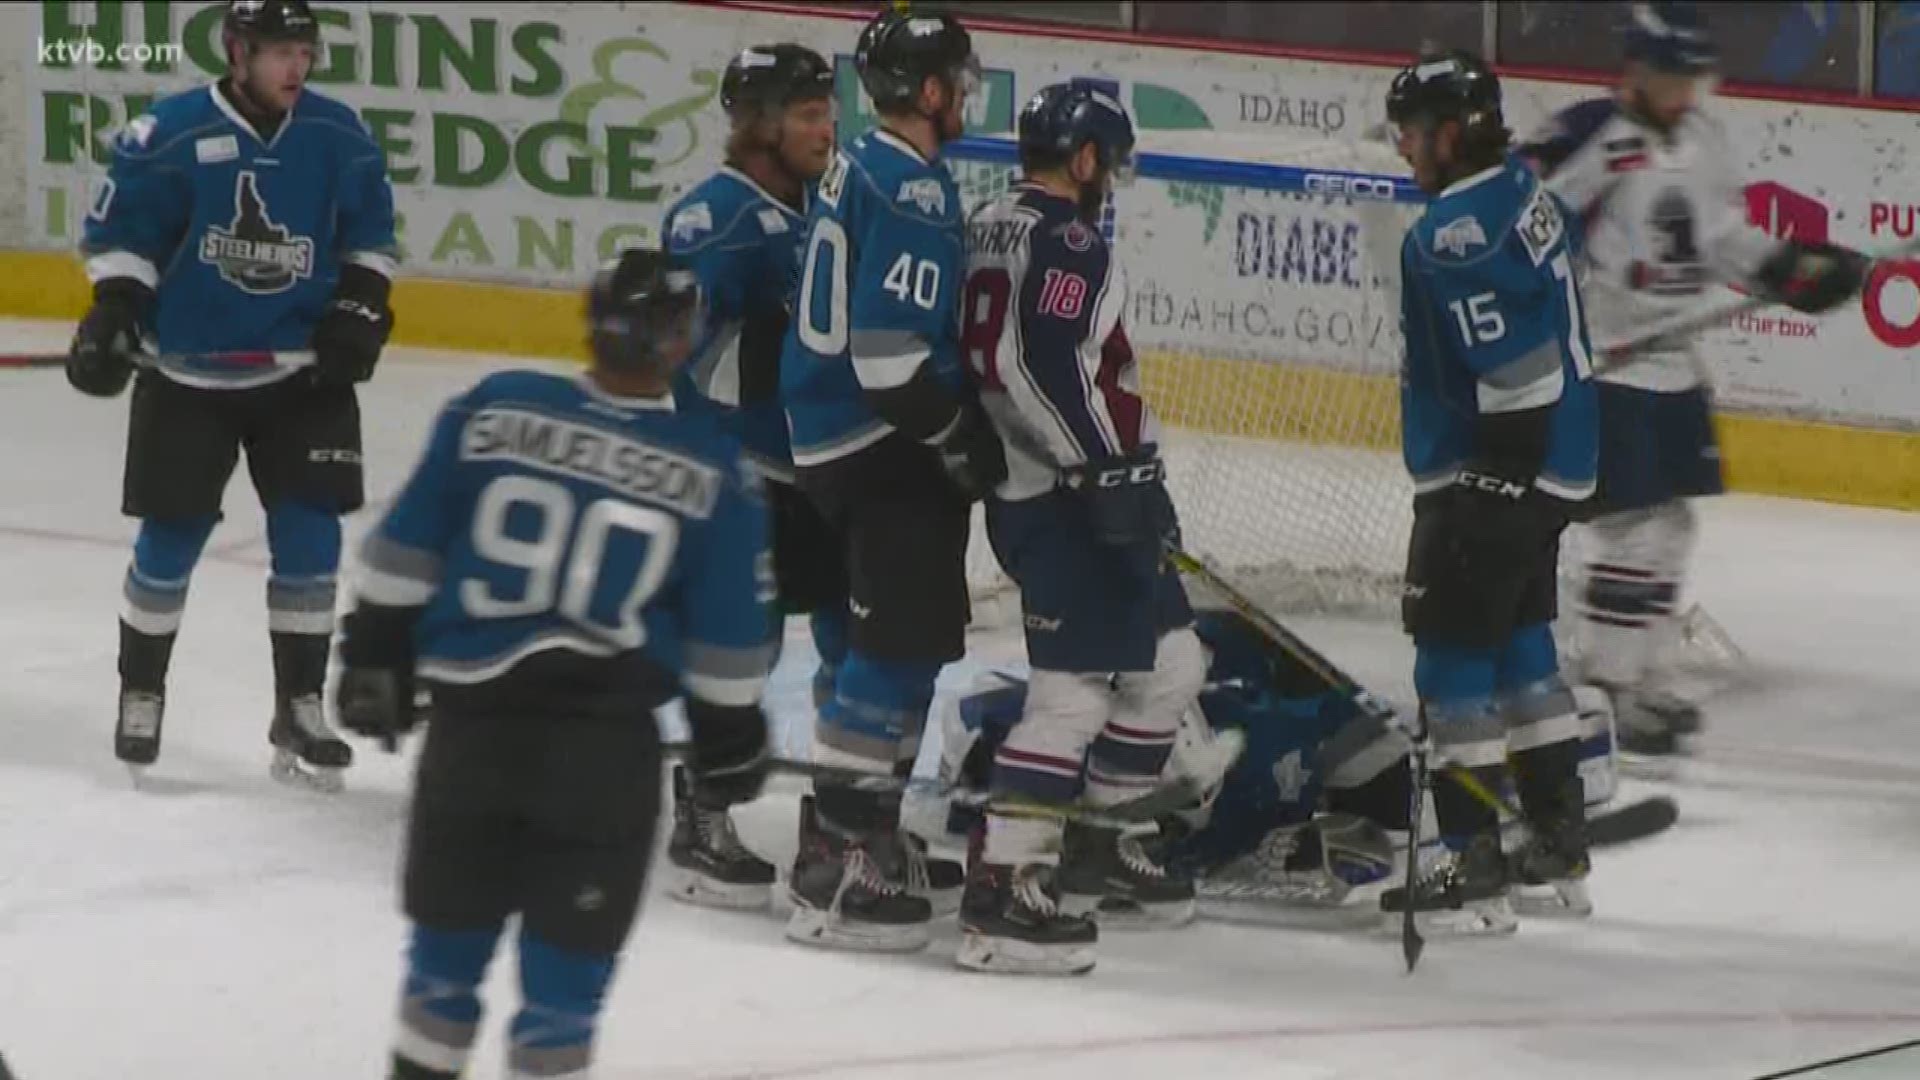 Tulsa now leads the series 3-0 in the Mountain Division Final of the Kelly Cup Playoffs.